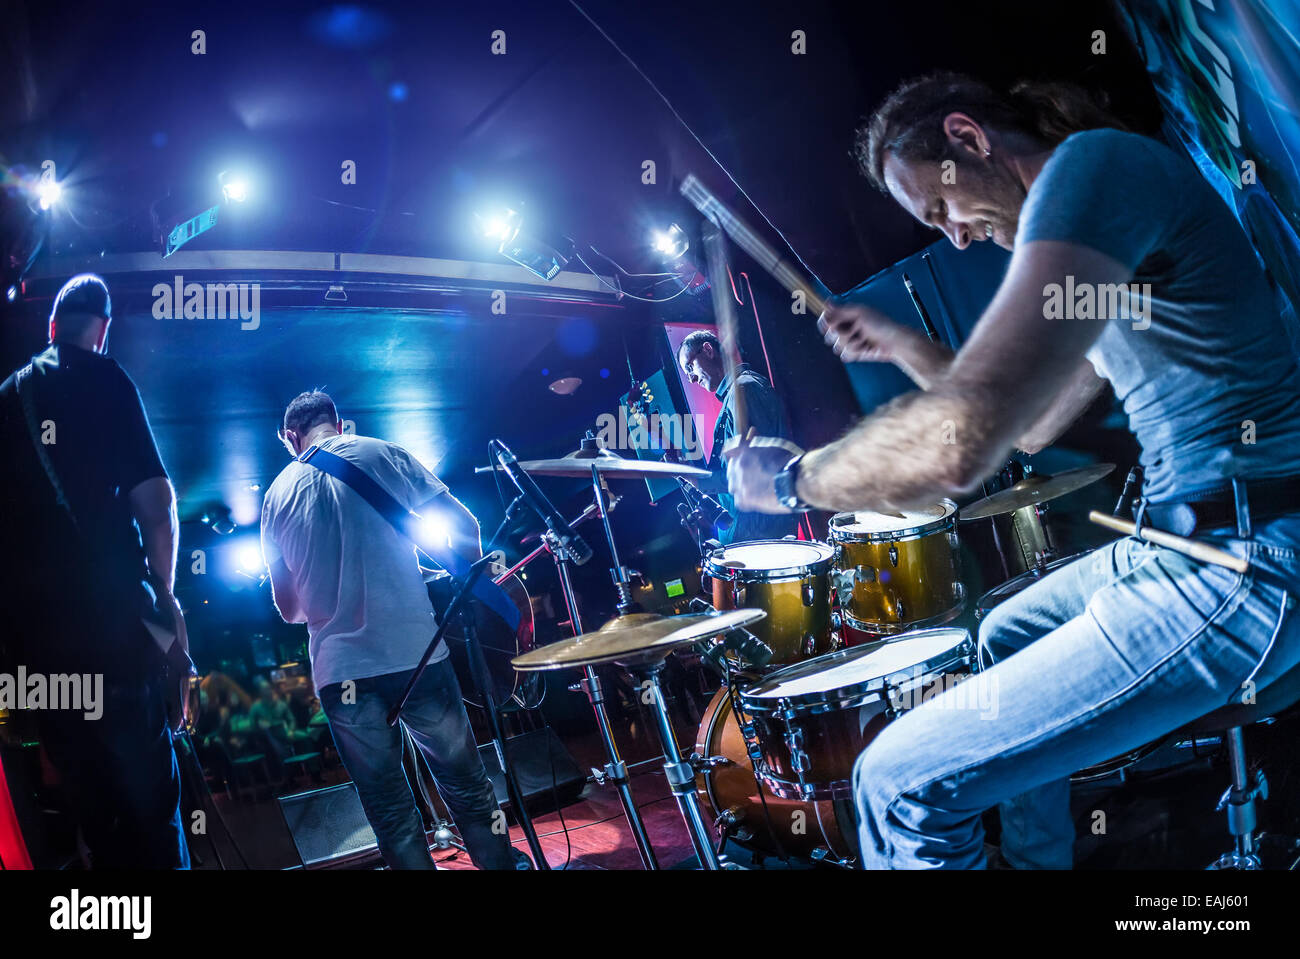 Drummer playing on drum set on stage. Warning - Focus on the drum, authentic shooting with high iso in challenging lighting cond Stock Photo